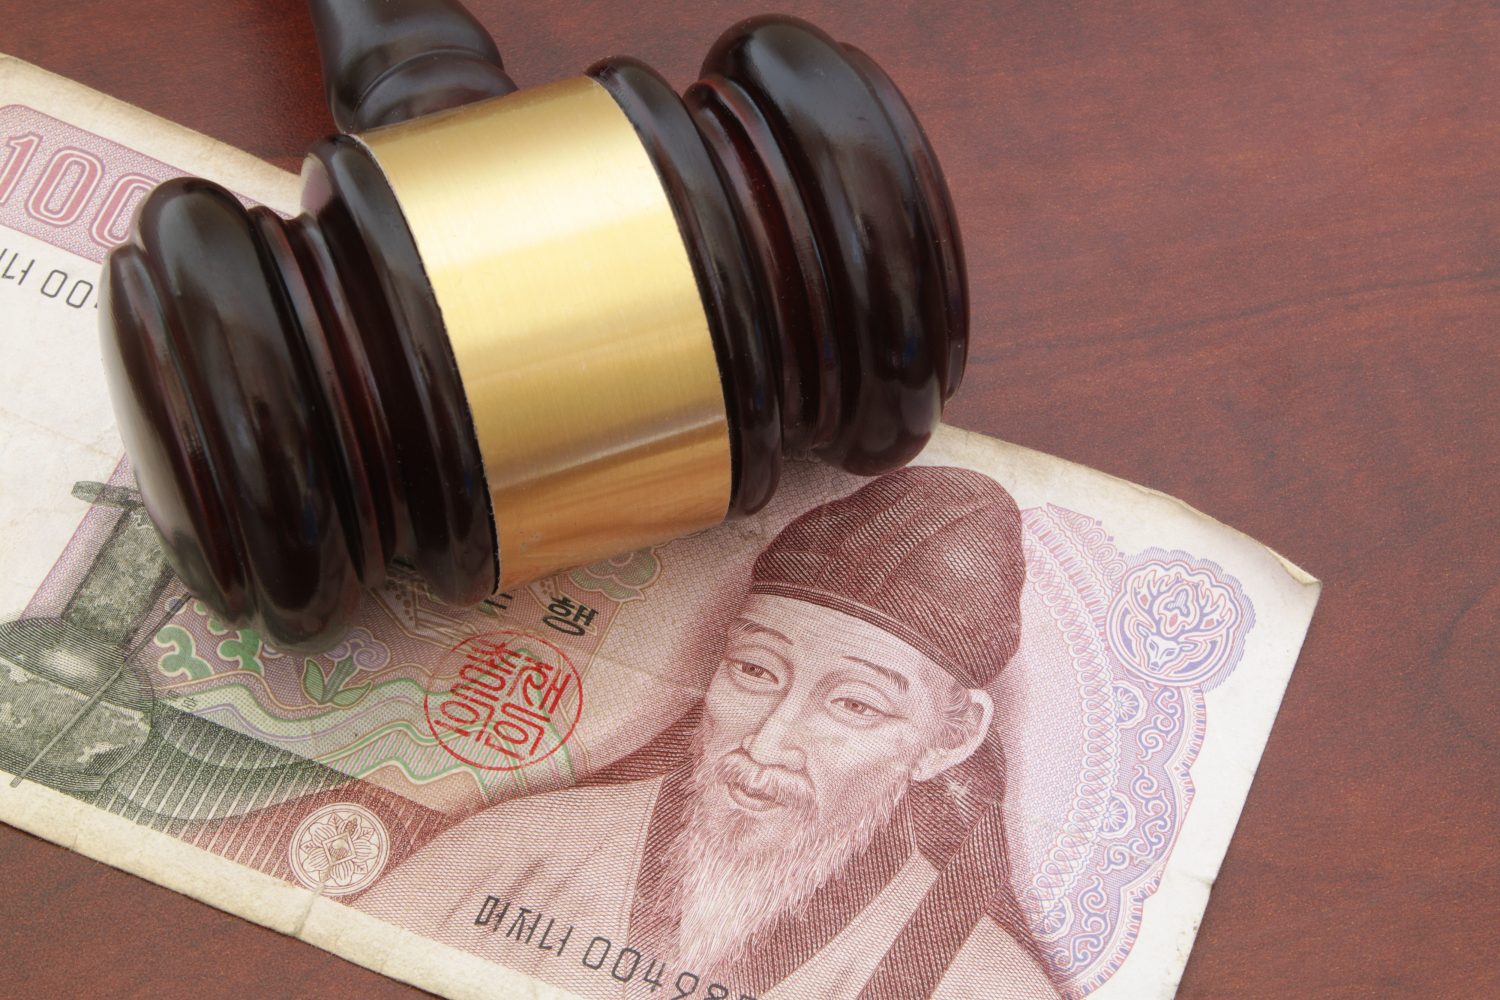 Court Win For Bithumb Exchange In Case Of Crypto Investor’s $355K Hack